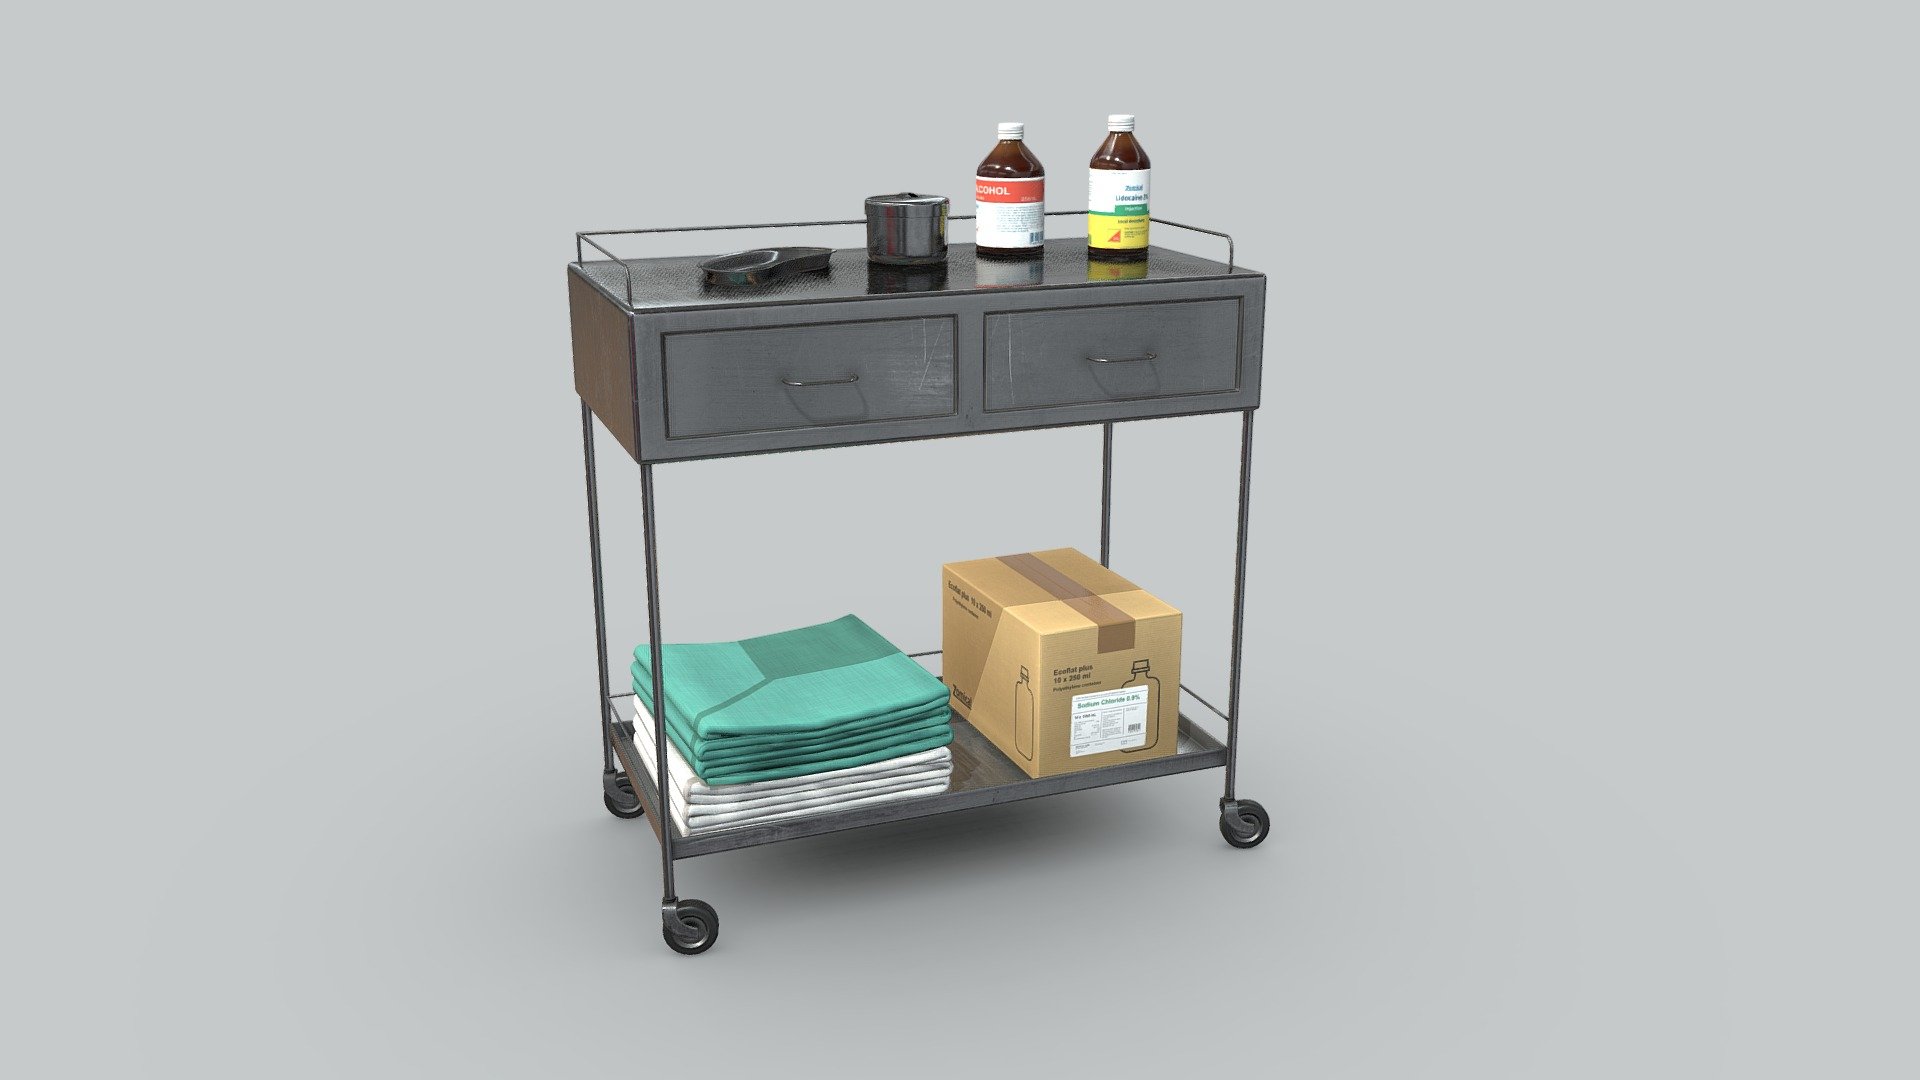 Lowpoly medicines trolley with 5679 polys. All quads, real measures, centered in 0,0 coordinates and PBR textures in 4096 x 4096 in two materials. Ready to use. See the bed for this asset here: https://skfb.ly/oMVtn 
See the Hospital drip for this asset here: https://skfb.ly/oNuup
See the oxygen gas tank here: https://skfb.ly/oNxK6
See Medicines hospital cupboard here: https://skfb.ly/oNJYN
See Old Hospital Sink here: https://skfb.ly/oNYDU - Medicines trolley - Buy Royalty Free 3D model by markusenes 3d model